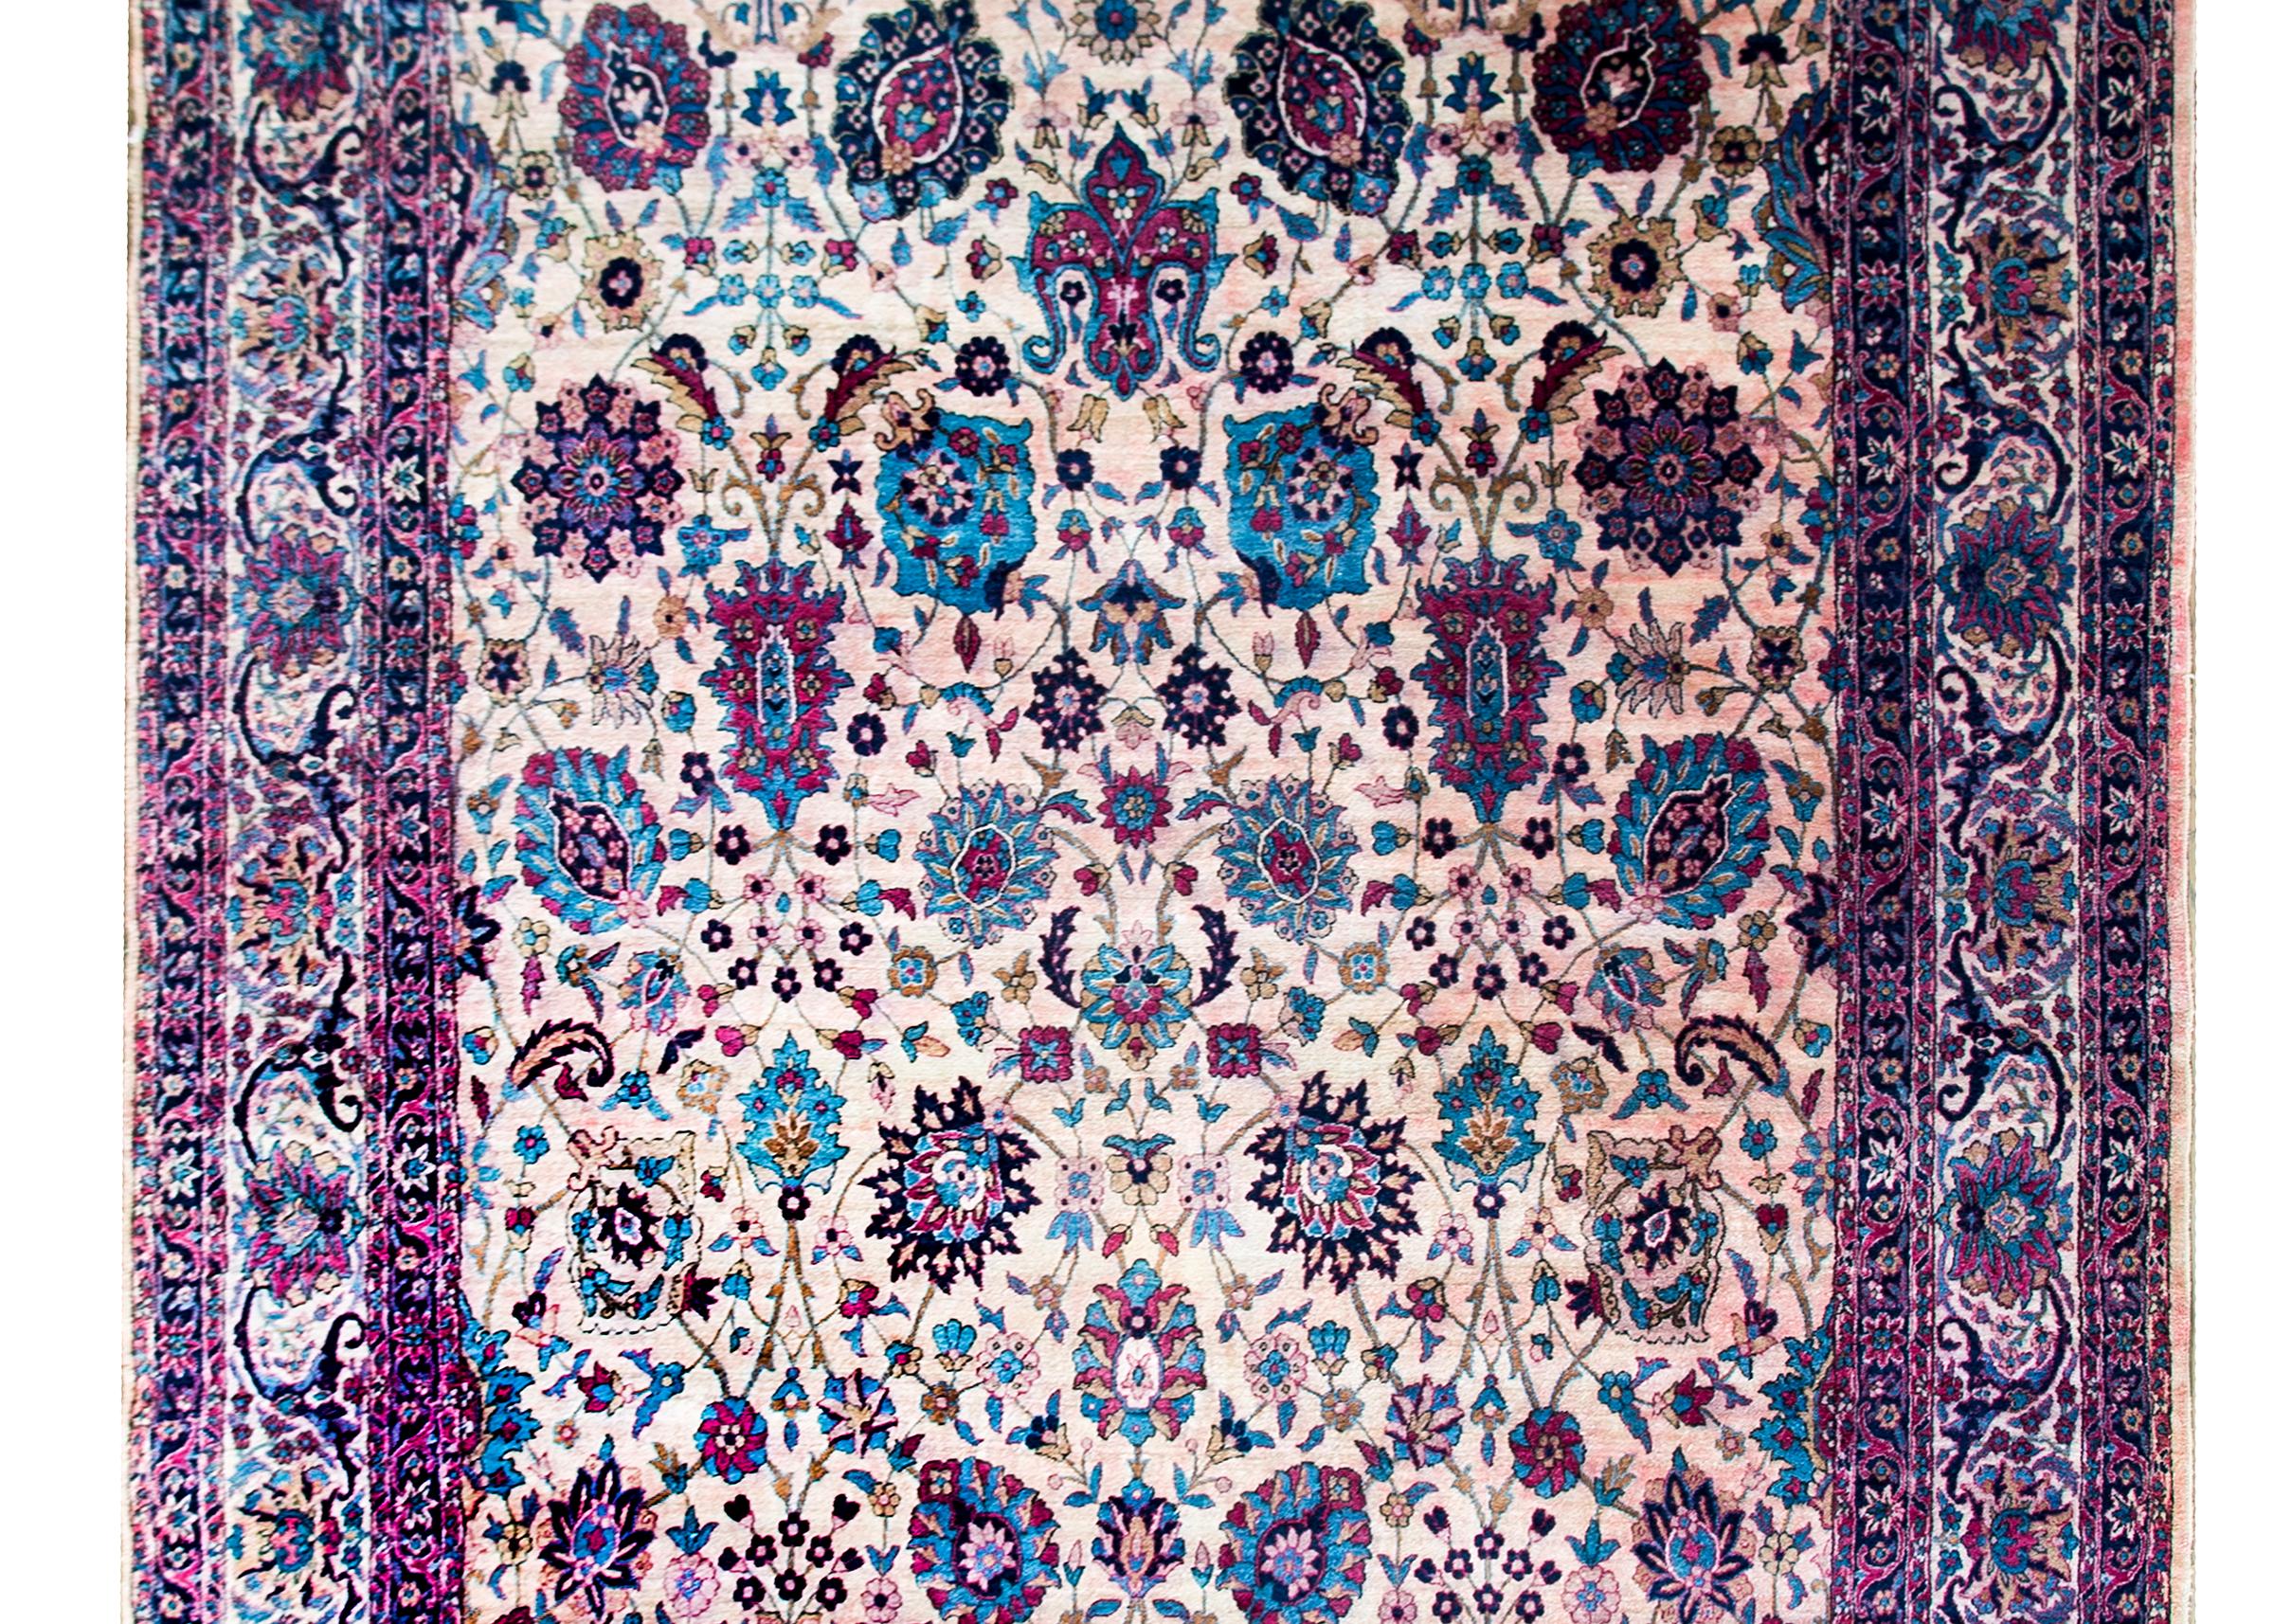 A wonderful early 20th century Persian Yazd rug with an all-over mirrored floral and scrolling vine pattern woven in light and dark indigo, cranberry, light pink, gold, and white wool set against a cream colored background.  The border is complex